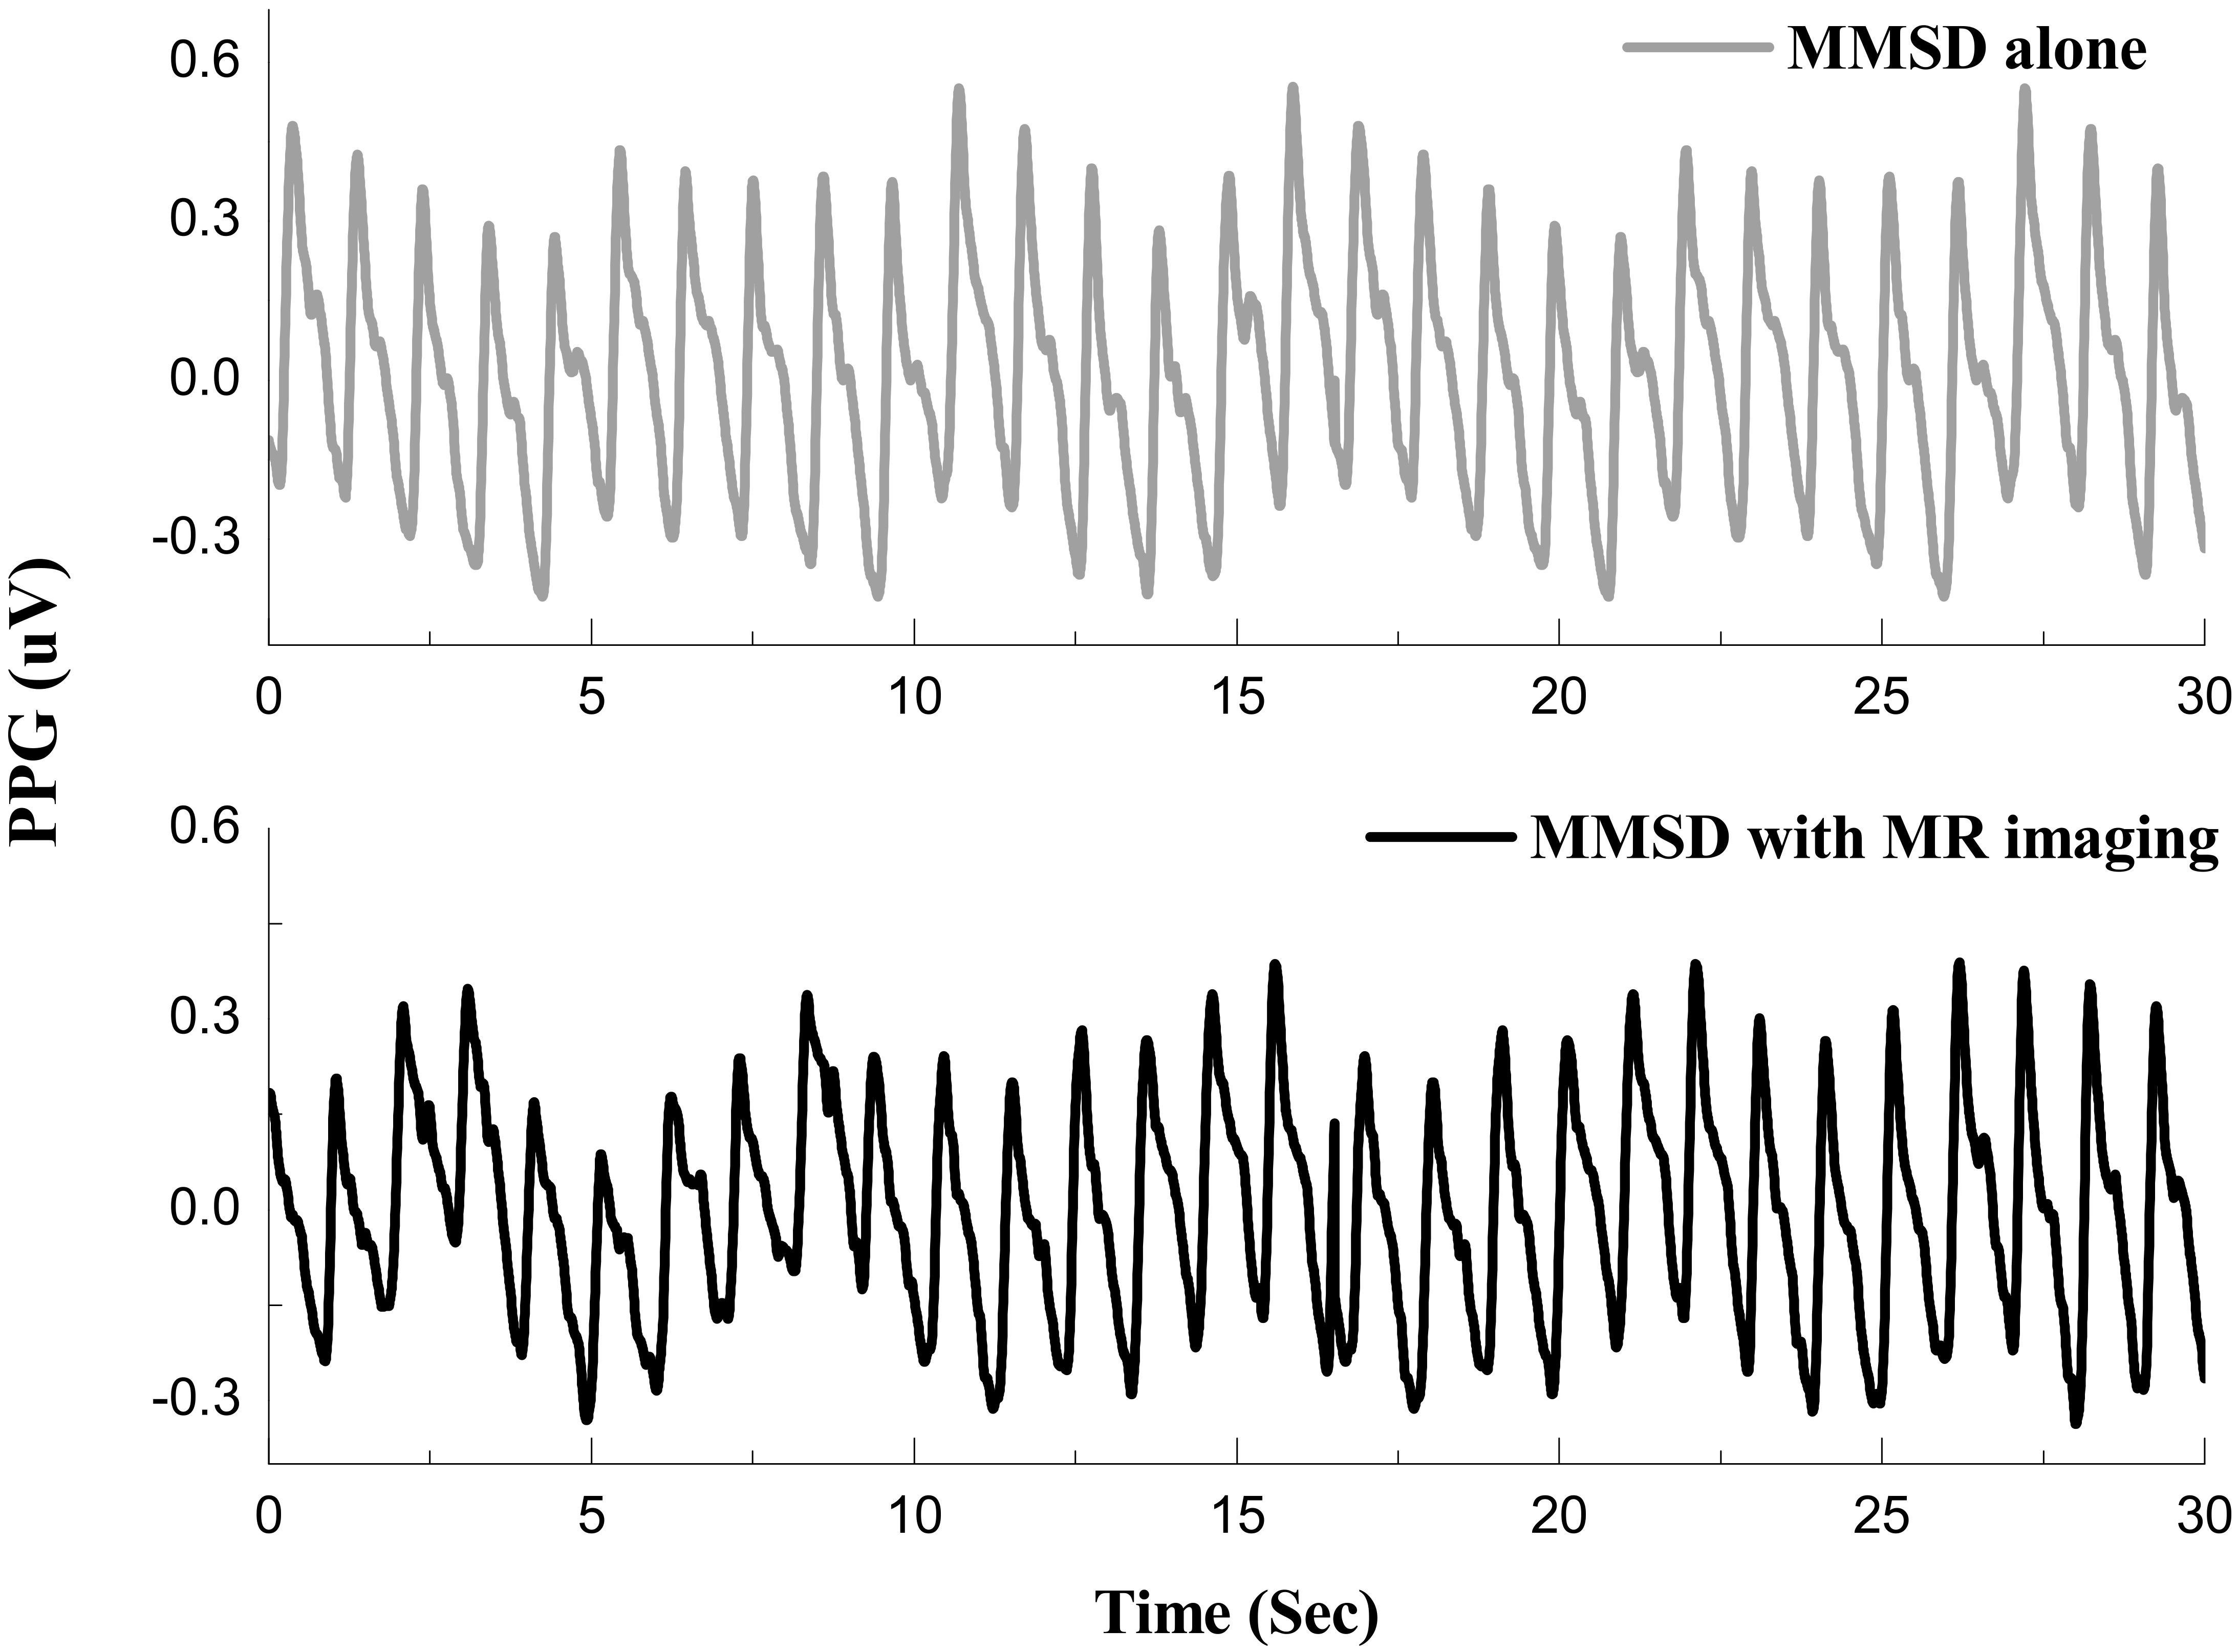 Photoplethysmographic signal in microvolts, measured with MMSD-alone and with MMSD + MR imaging.